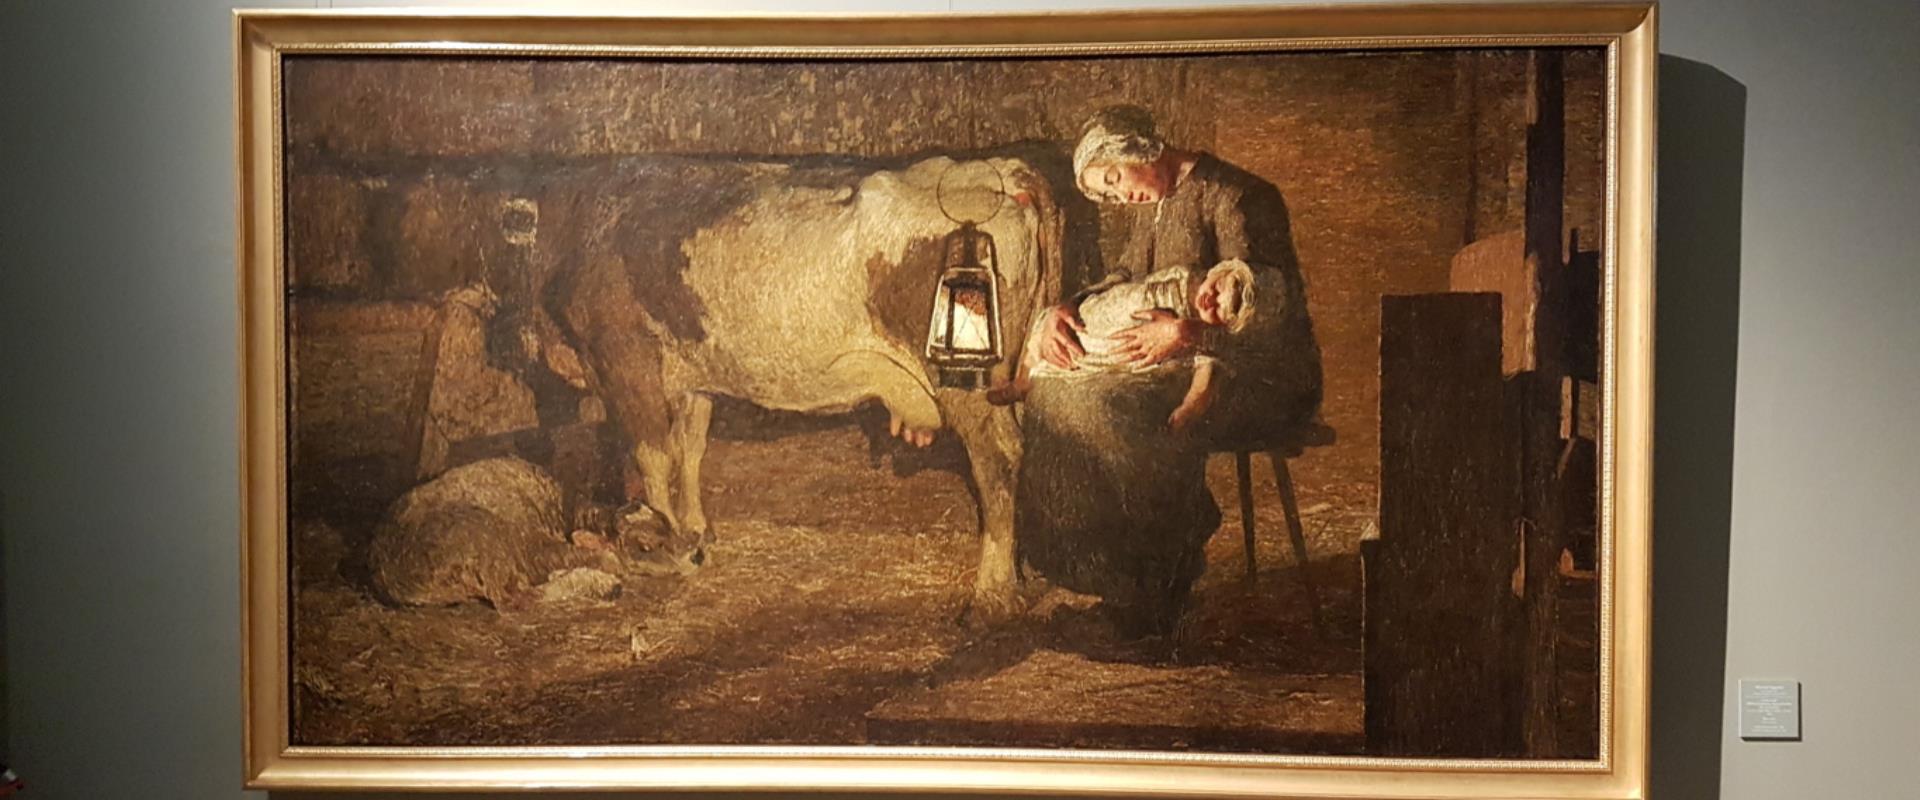 Exhibited at the Galleria d''Arte Moderna in Milan (GAM), Le due madri by Giovanni segantini is a masterpiece of Divisionist art. Stay at the Best Western Hotel City and discover the treasures of Milan just a stone''s throw from your Hotel.